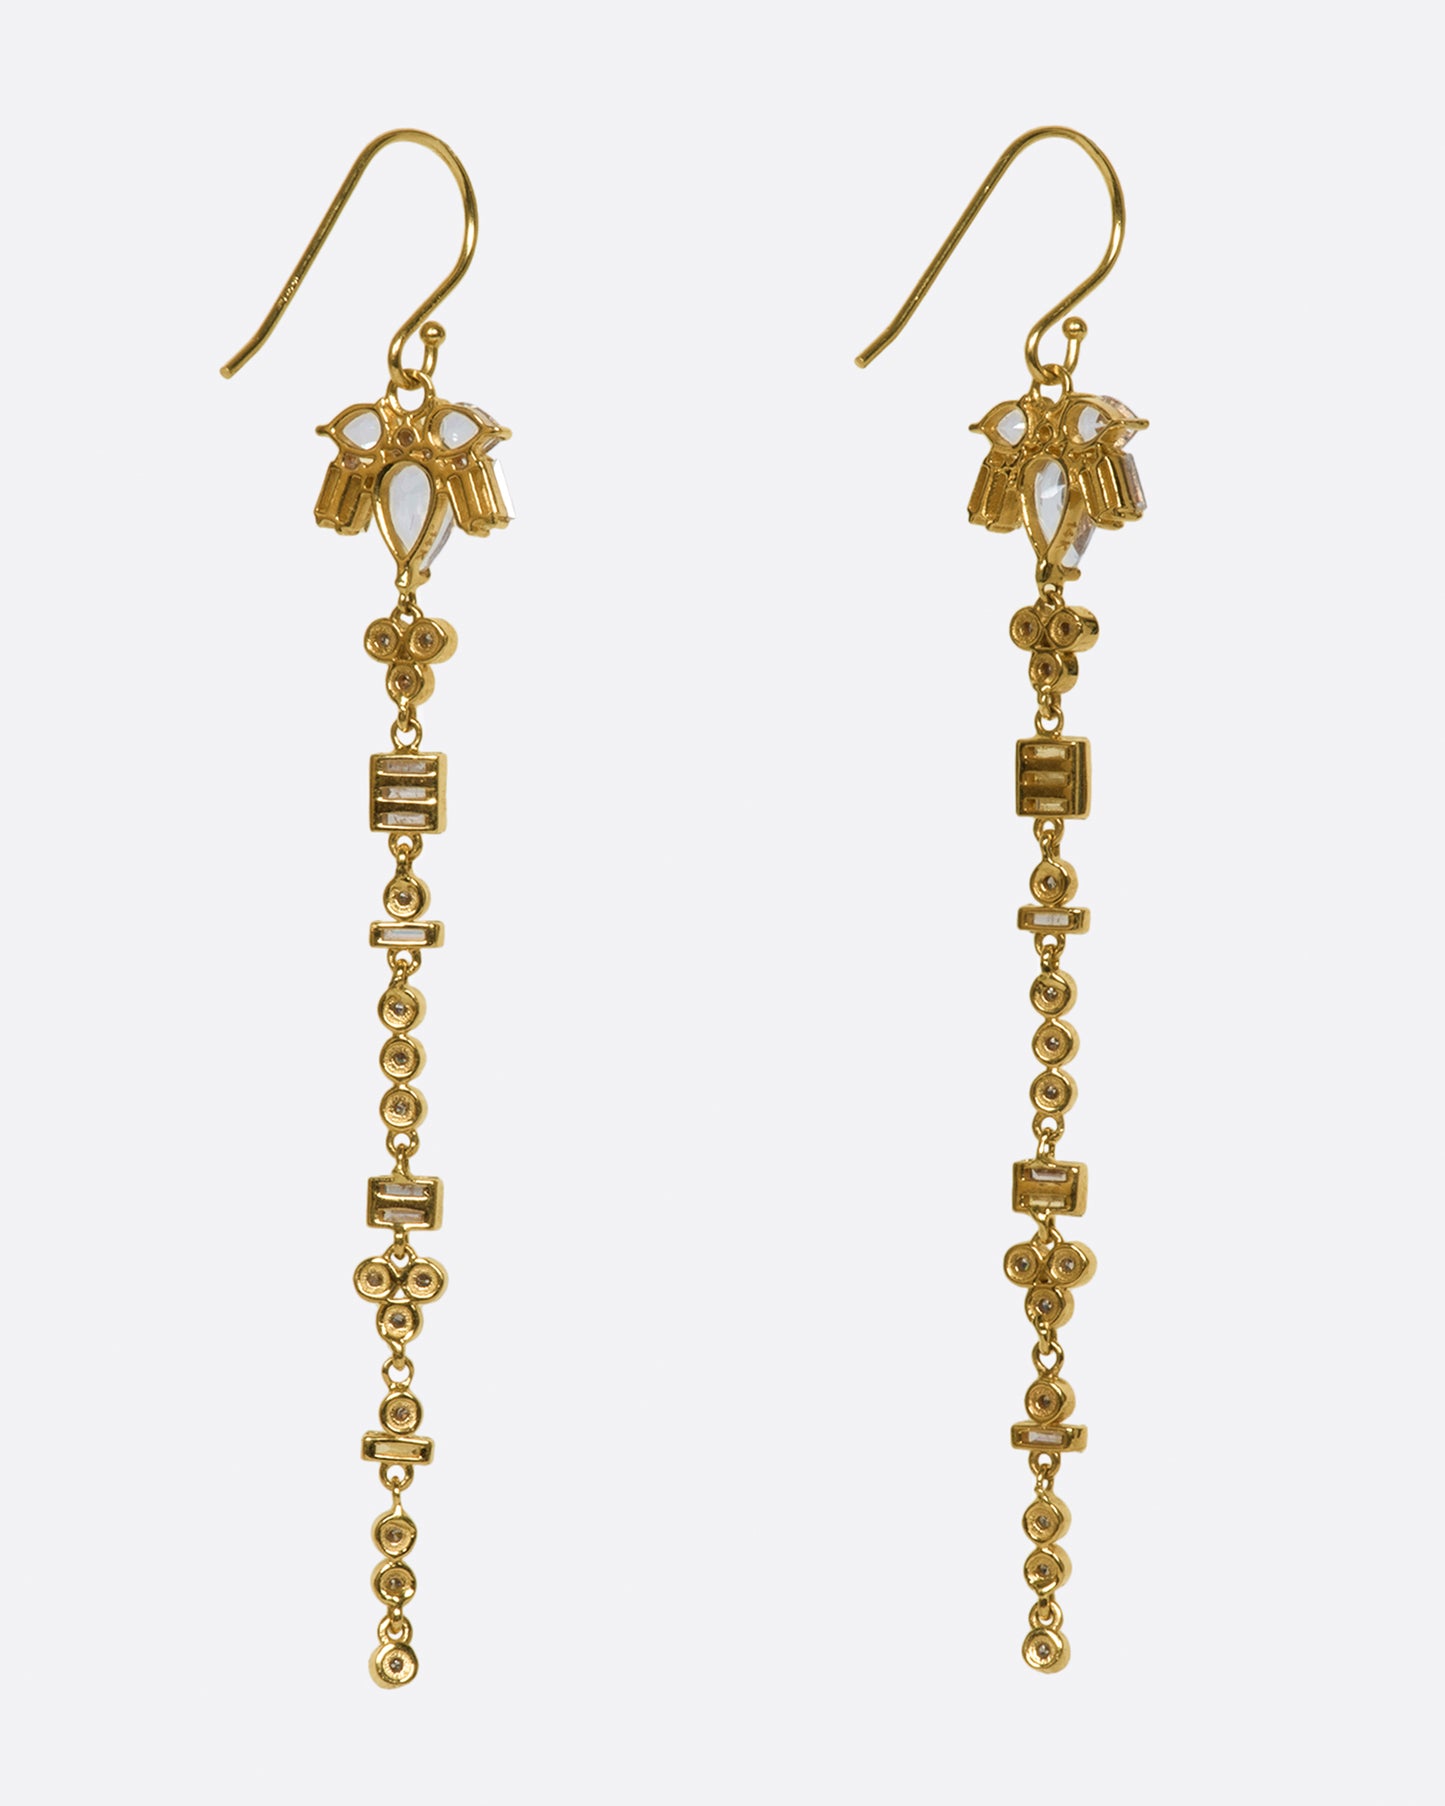 A pair of 14k gold drop earrings with a geometric variety of white topaz and diamonds.